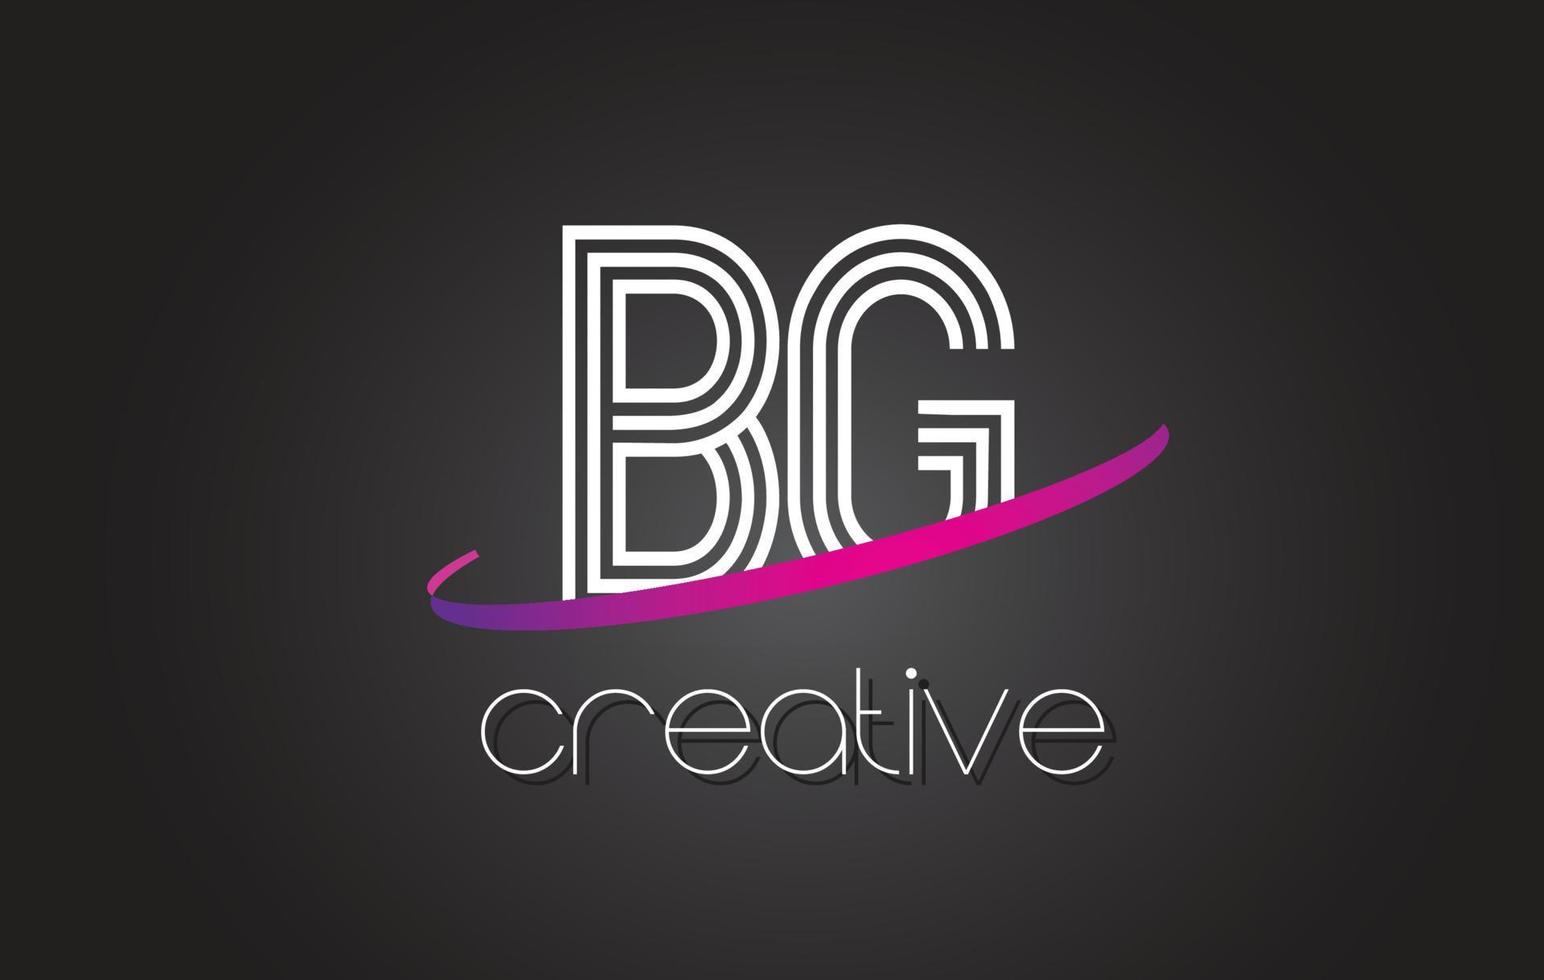 BG B G Letter Logo with Lines Design And Purple Swoosh. vector